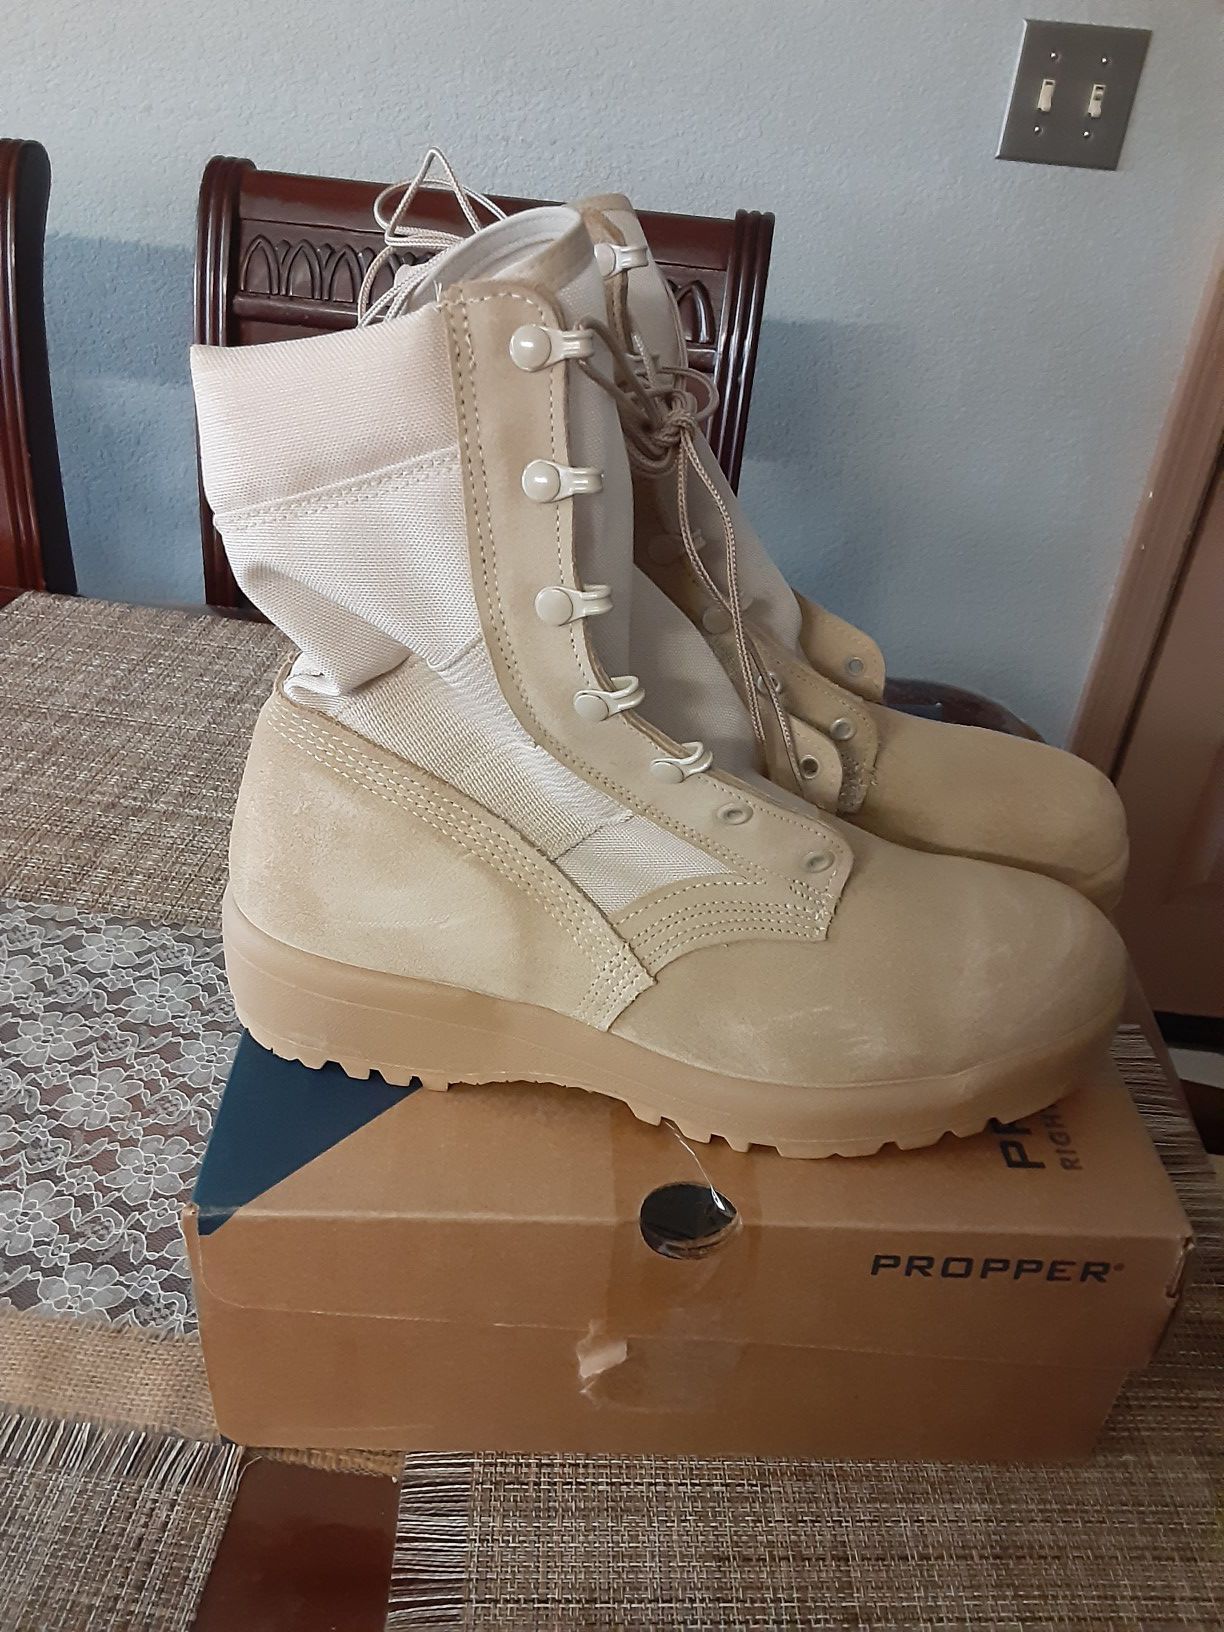 BRAND NEW Propper Military / Army boots Almost all sizes